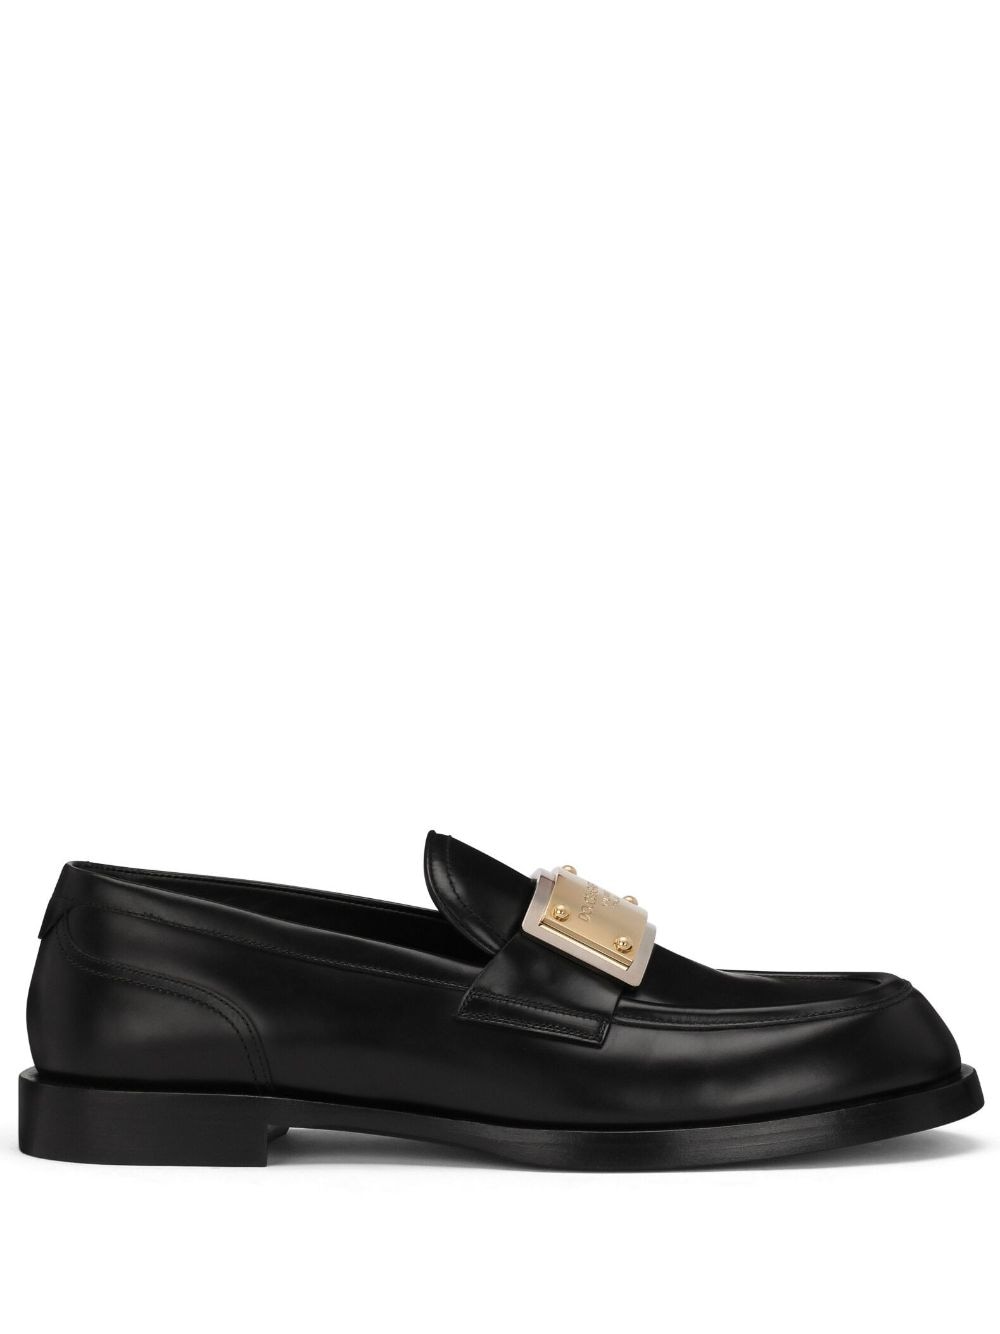 Bernini leather loafers<BR/><BR/><BR/>